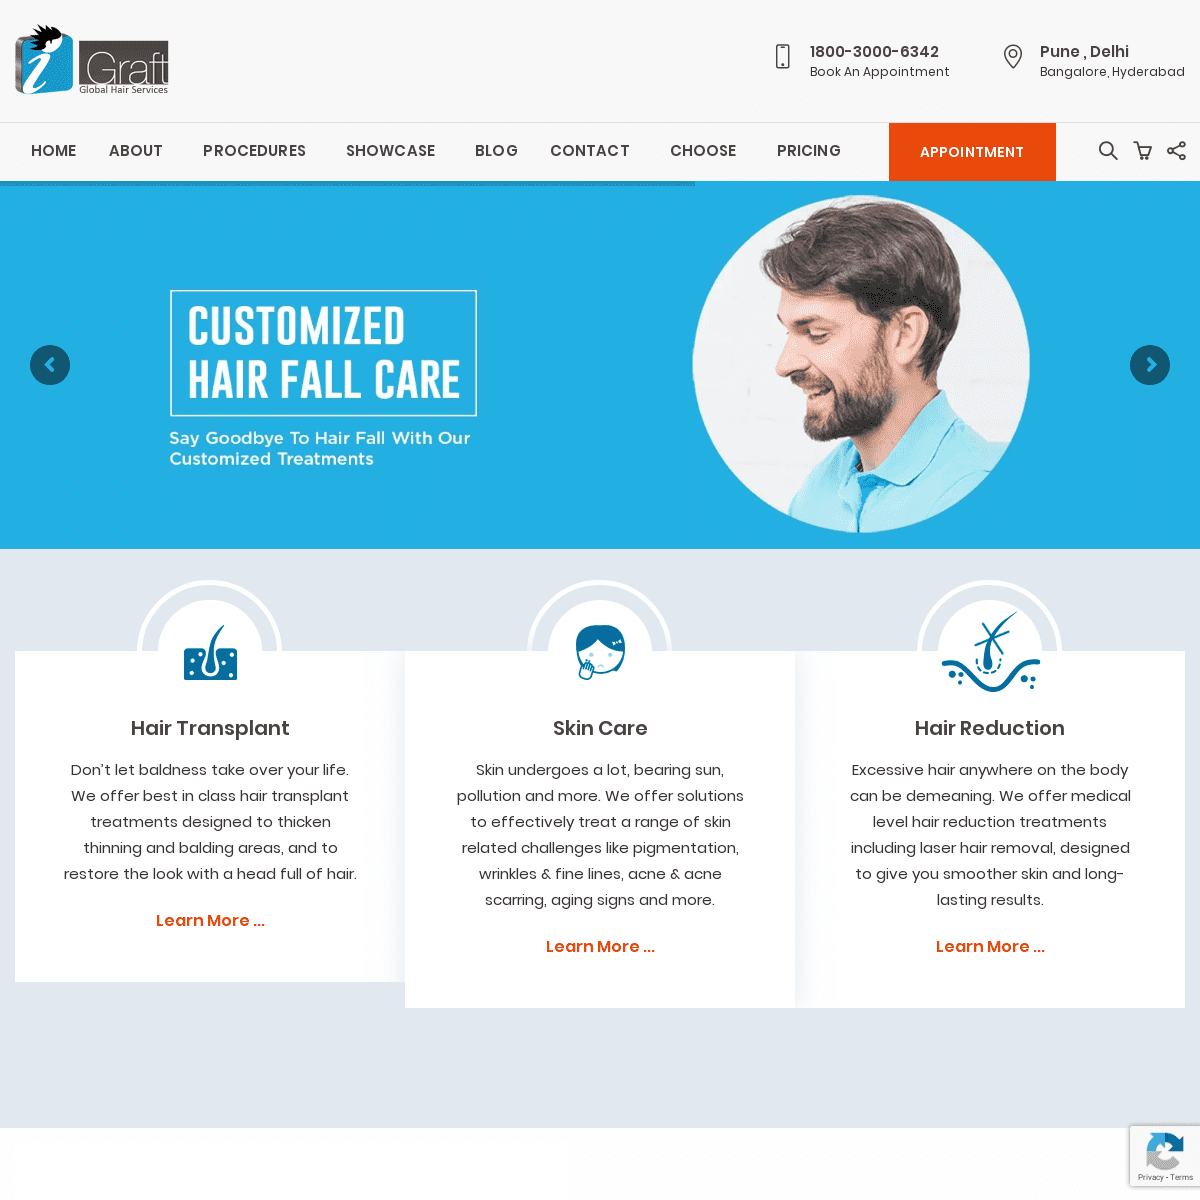 A complete backup of igraftglobalhairservices.com